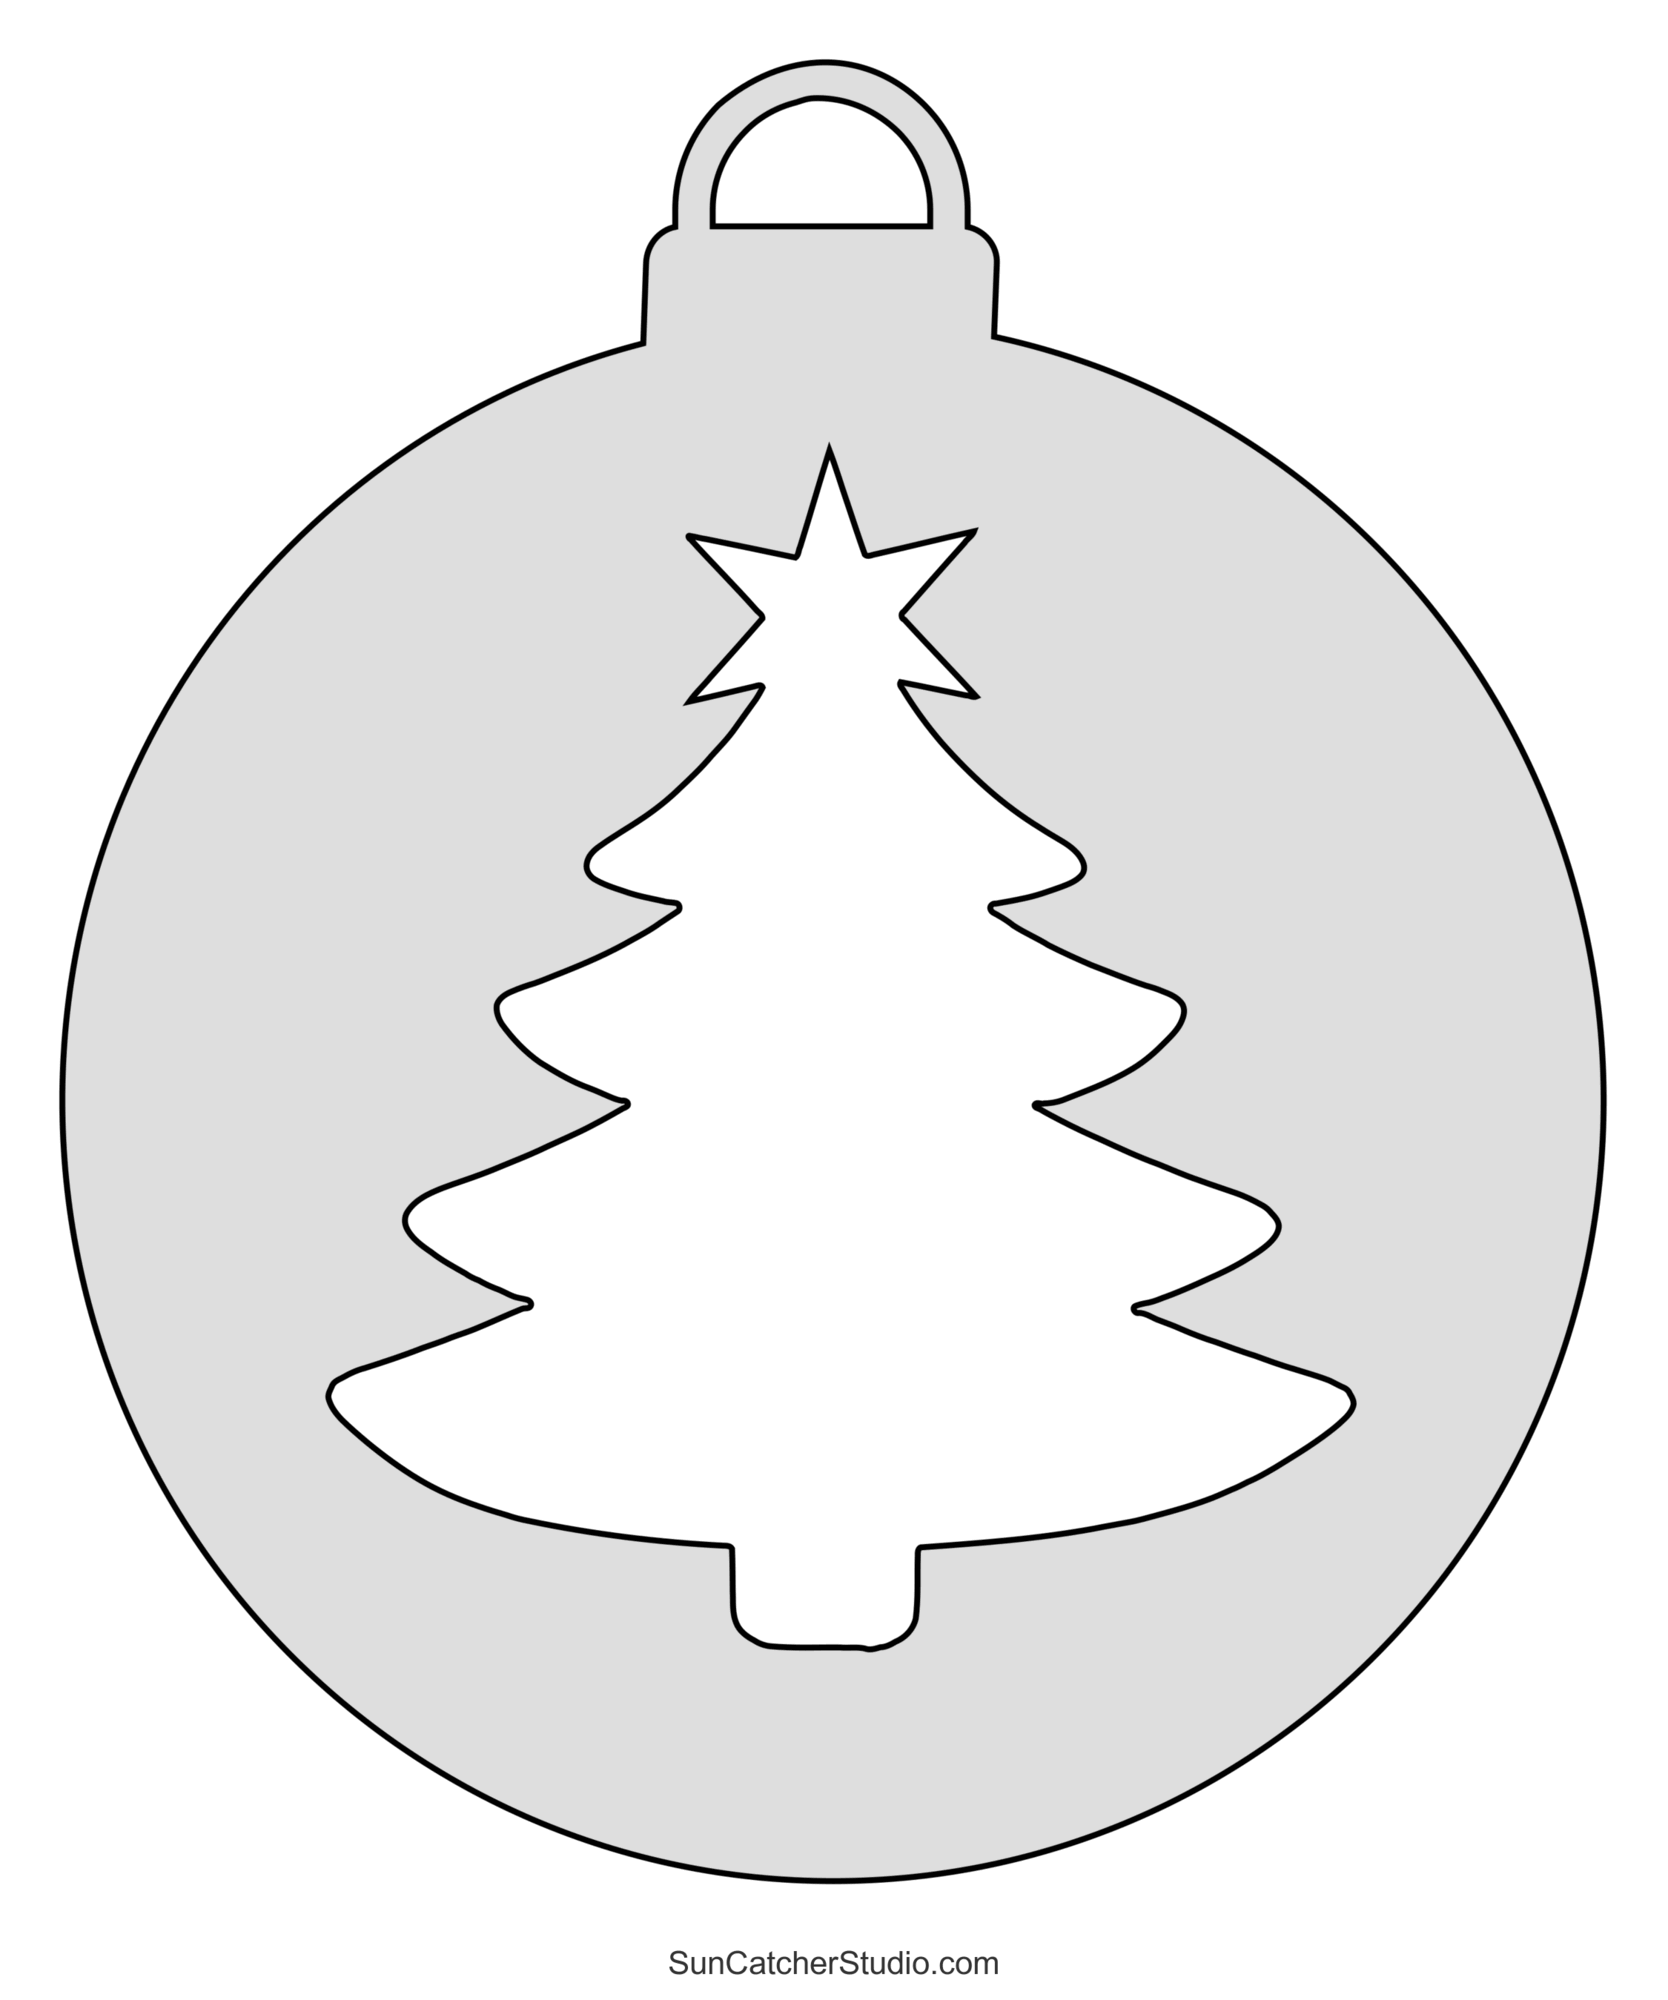 DIY Christmas Ornament Patterns, Templates, Stencils – DIY Projects ...